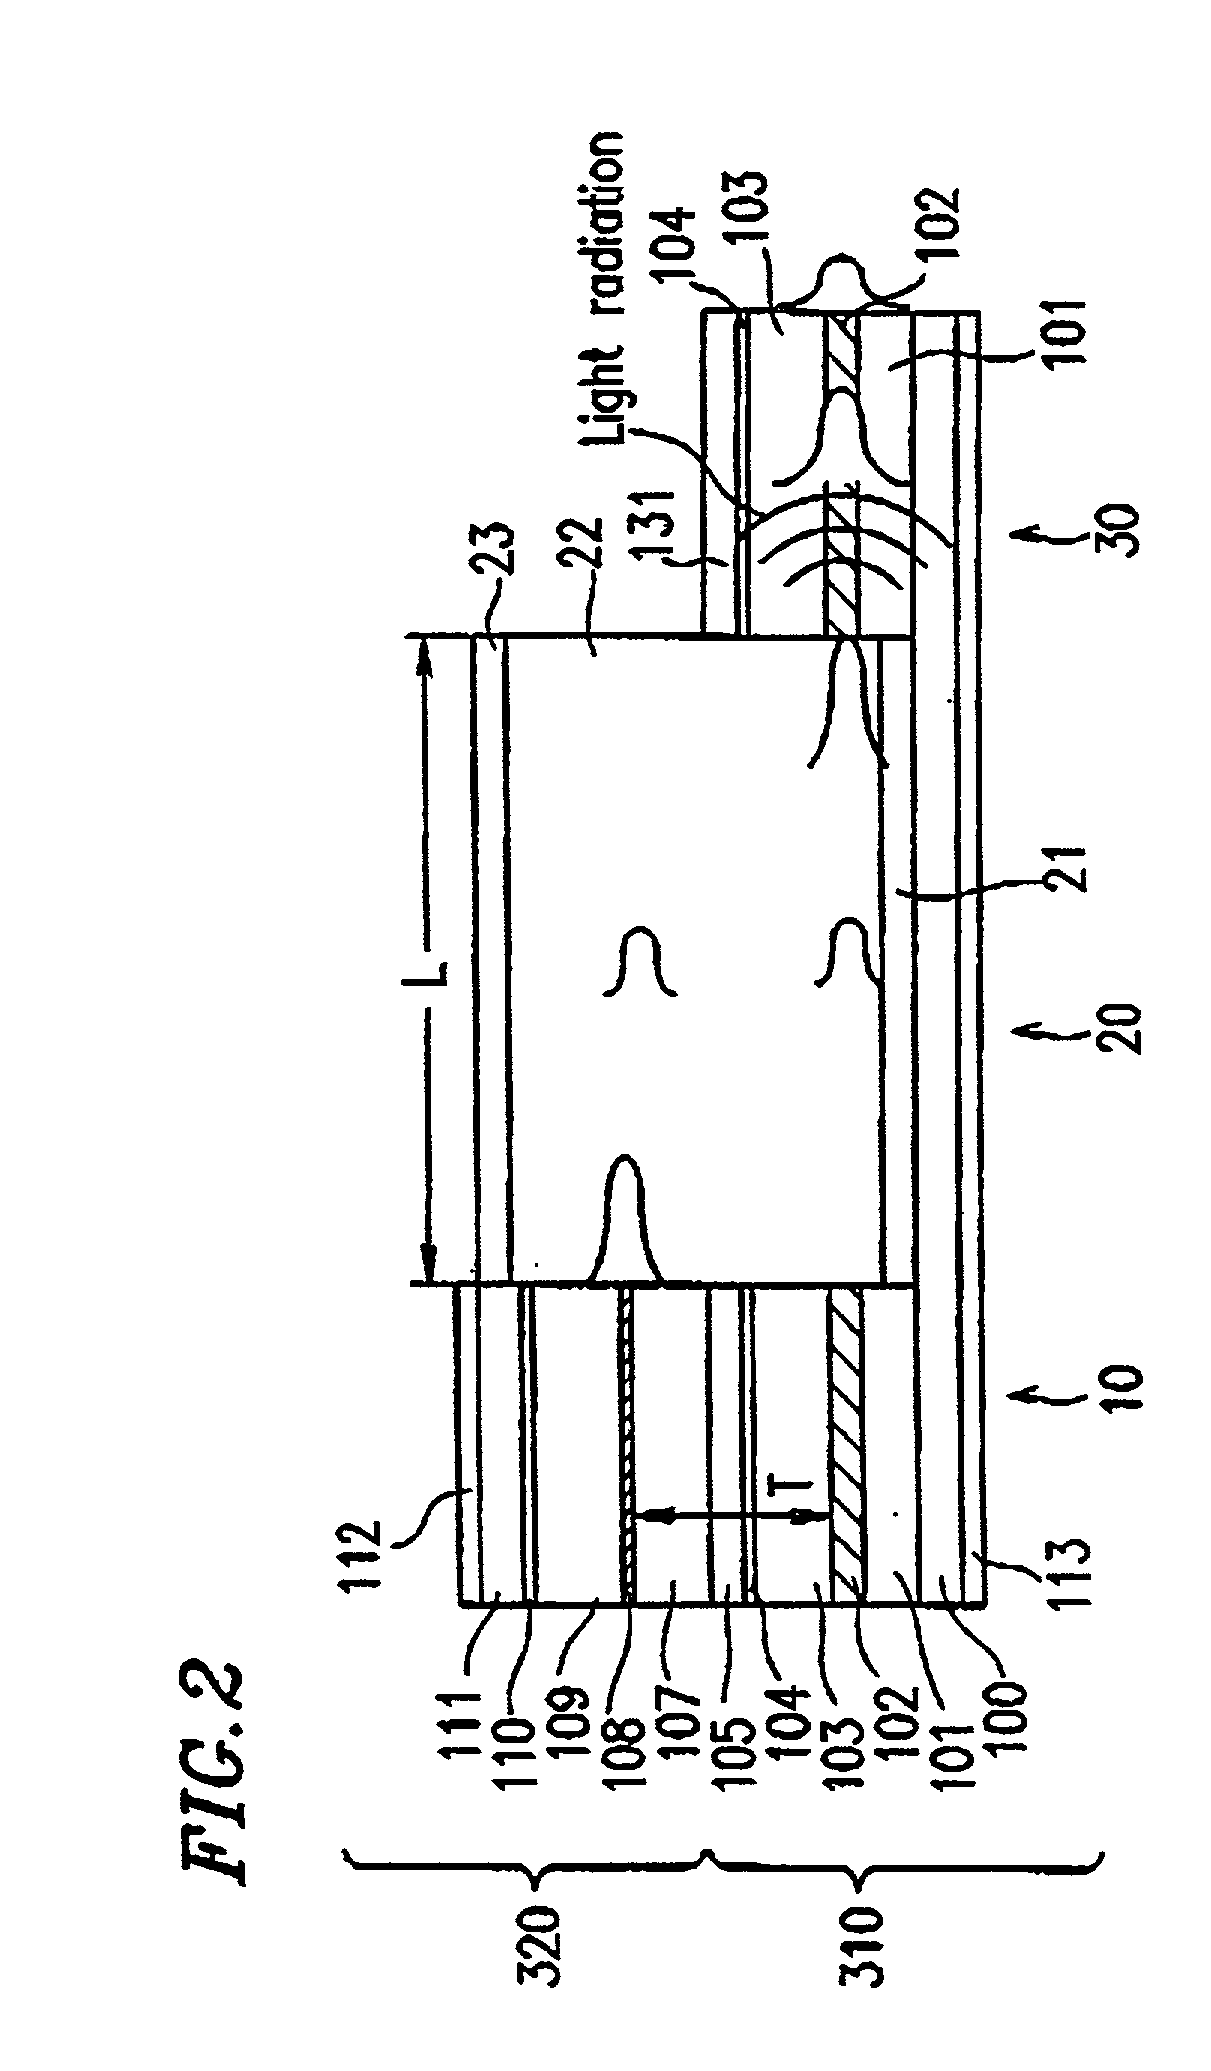 Integrated optical circuit device and method for producing the same